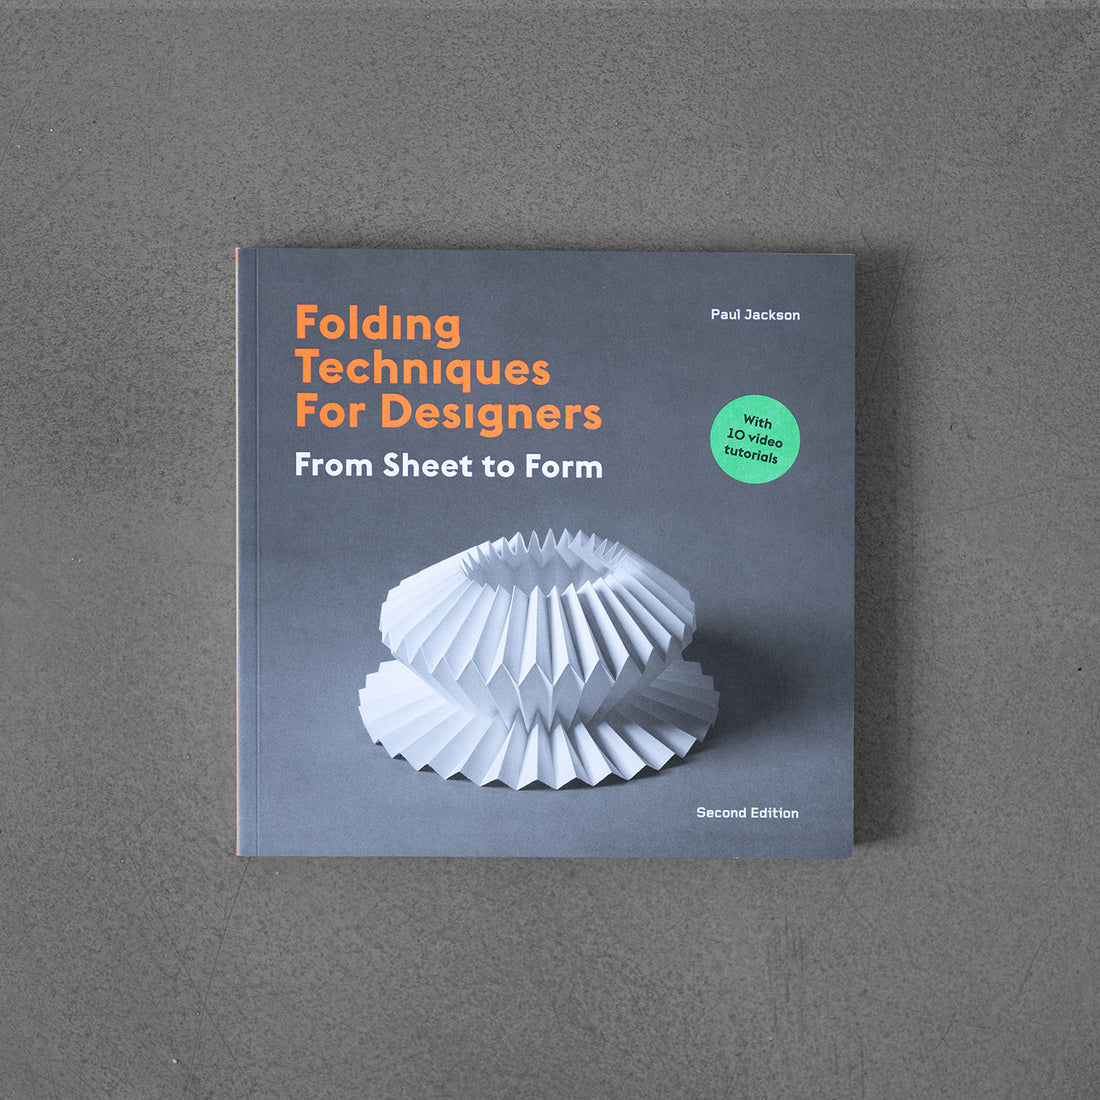 Folding Techniques for Designers (Second Edition)